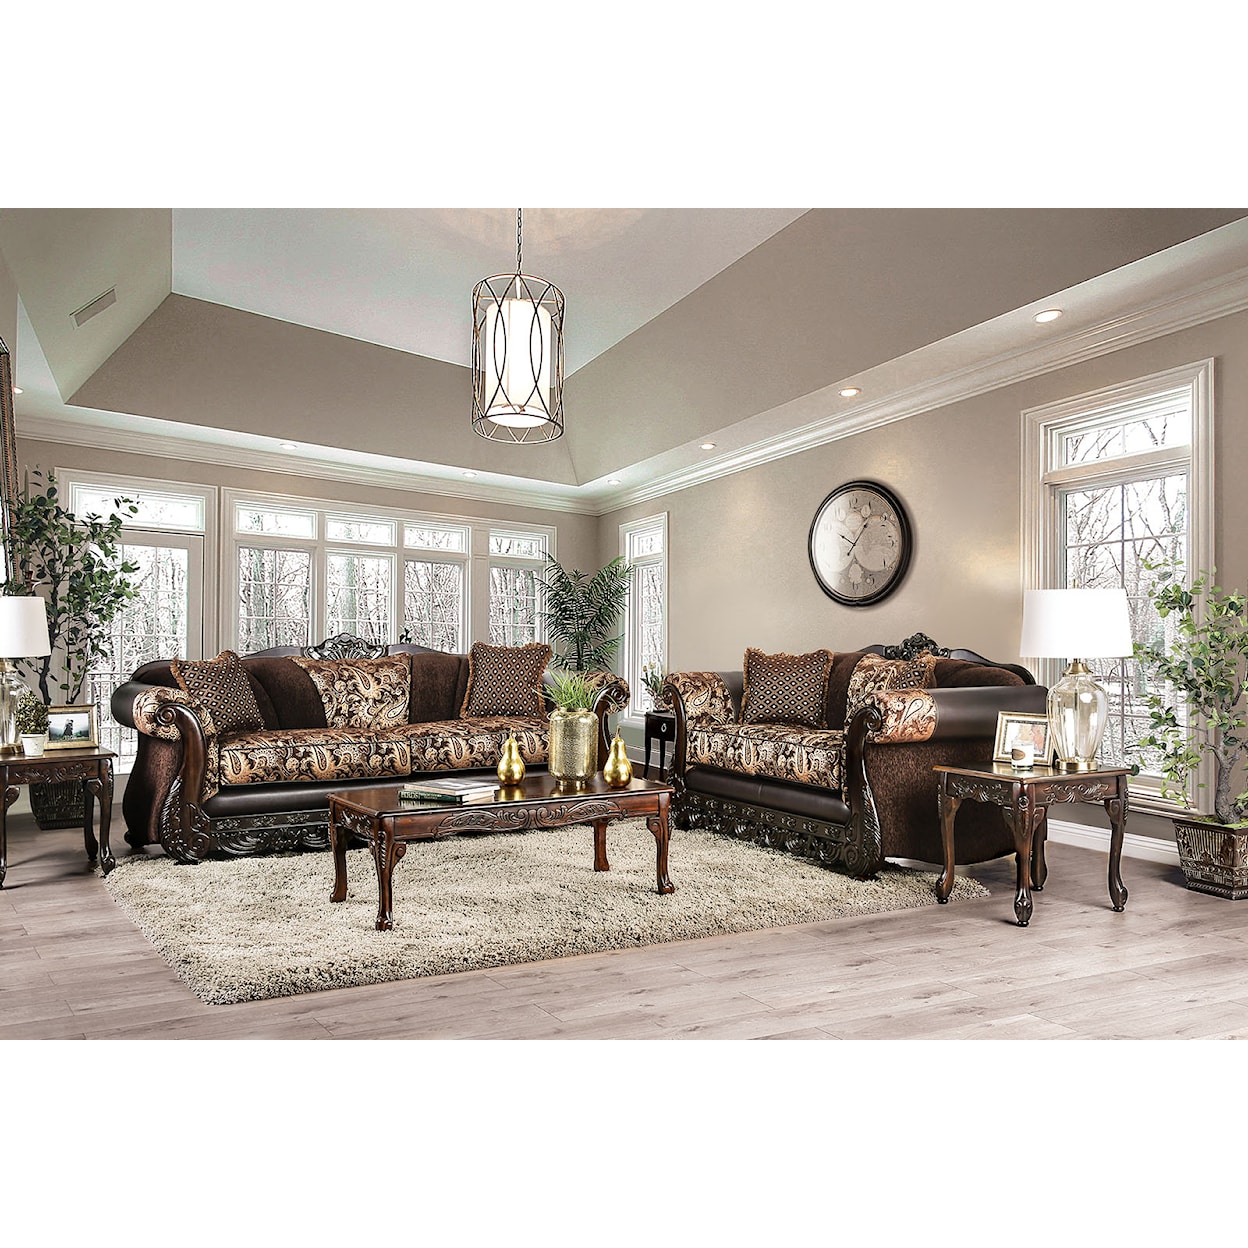 FUSA Newdale Sofa and Loveseat Set 